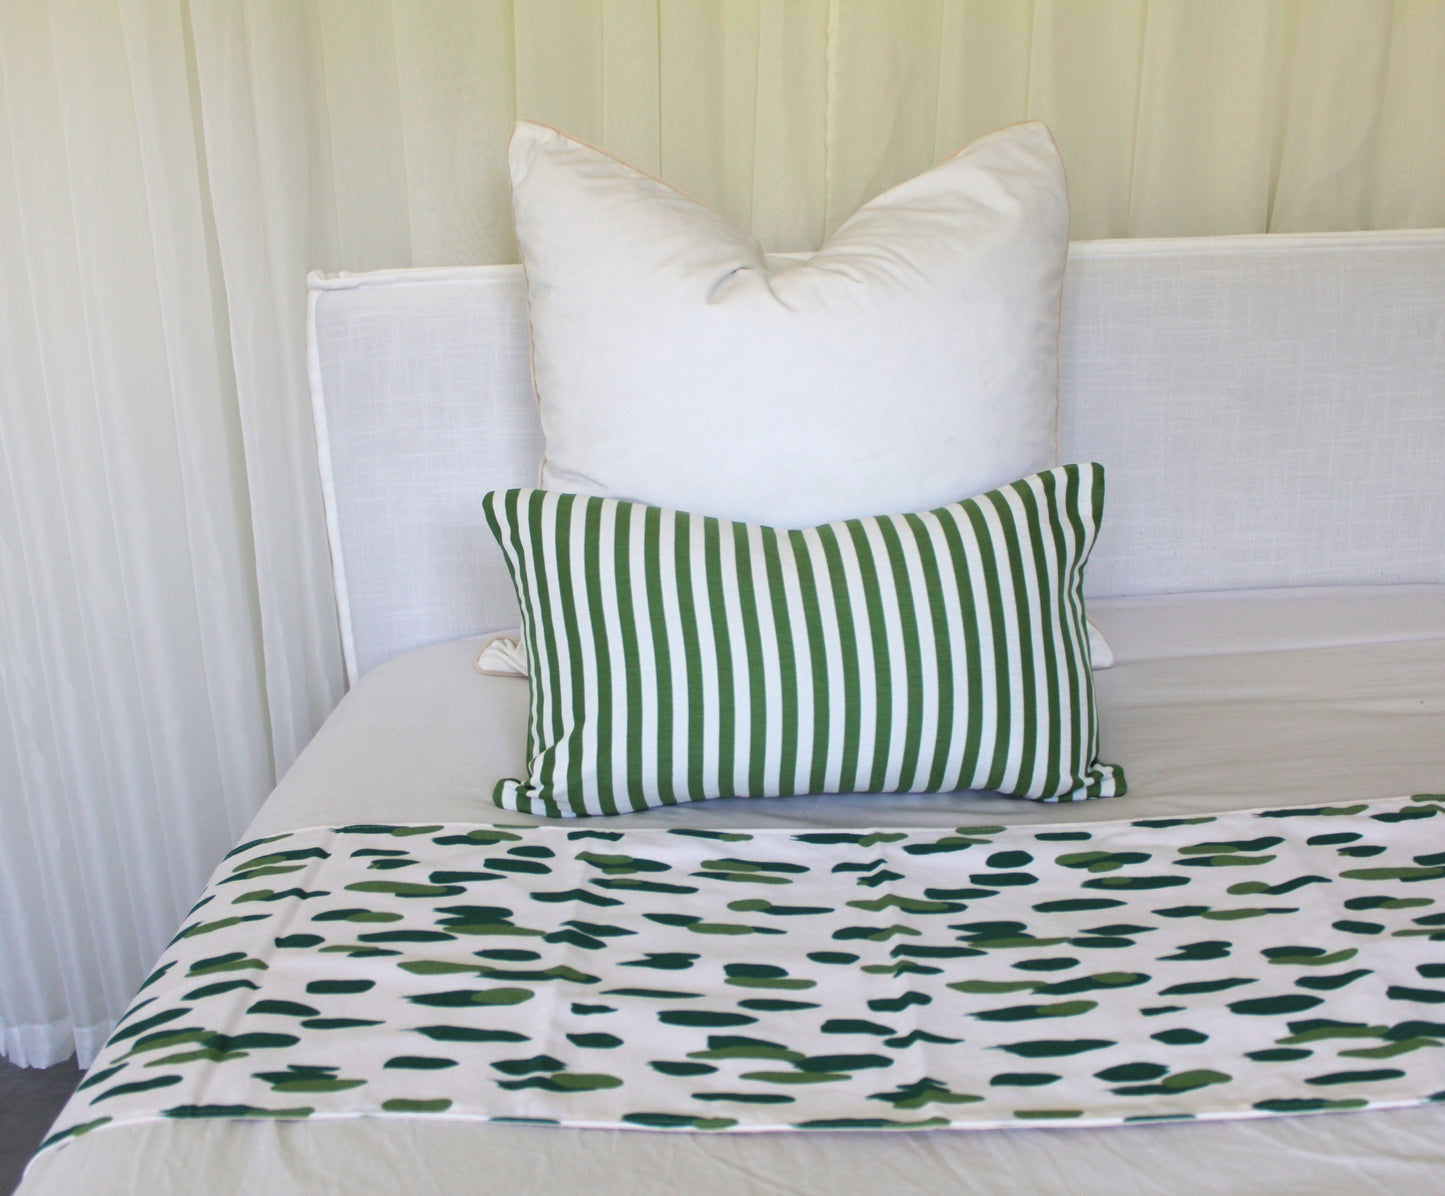 Green dotted Bed runner and Cushion cover bed set